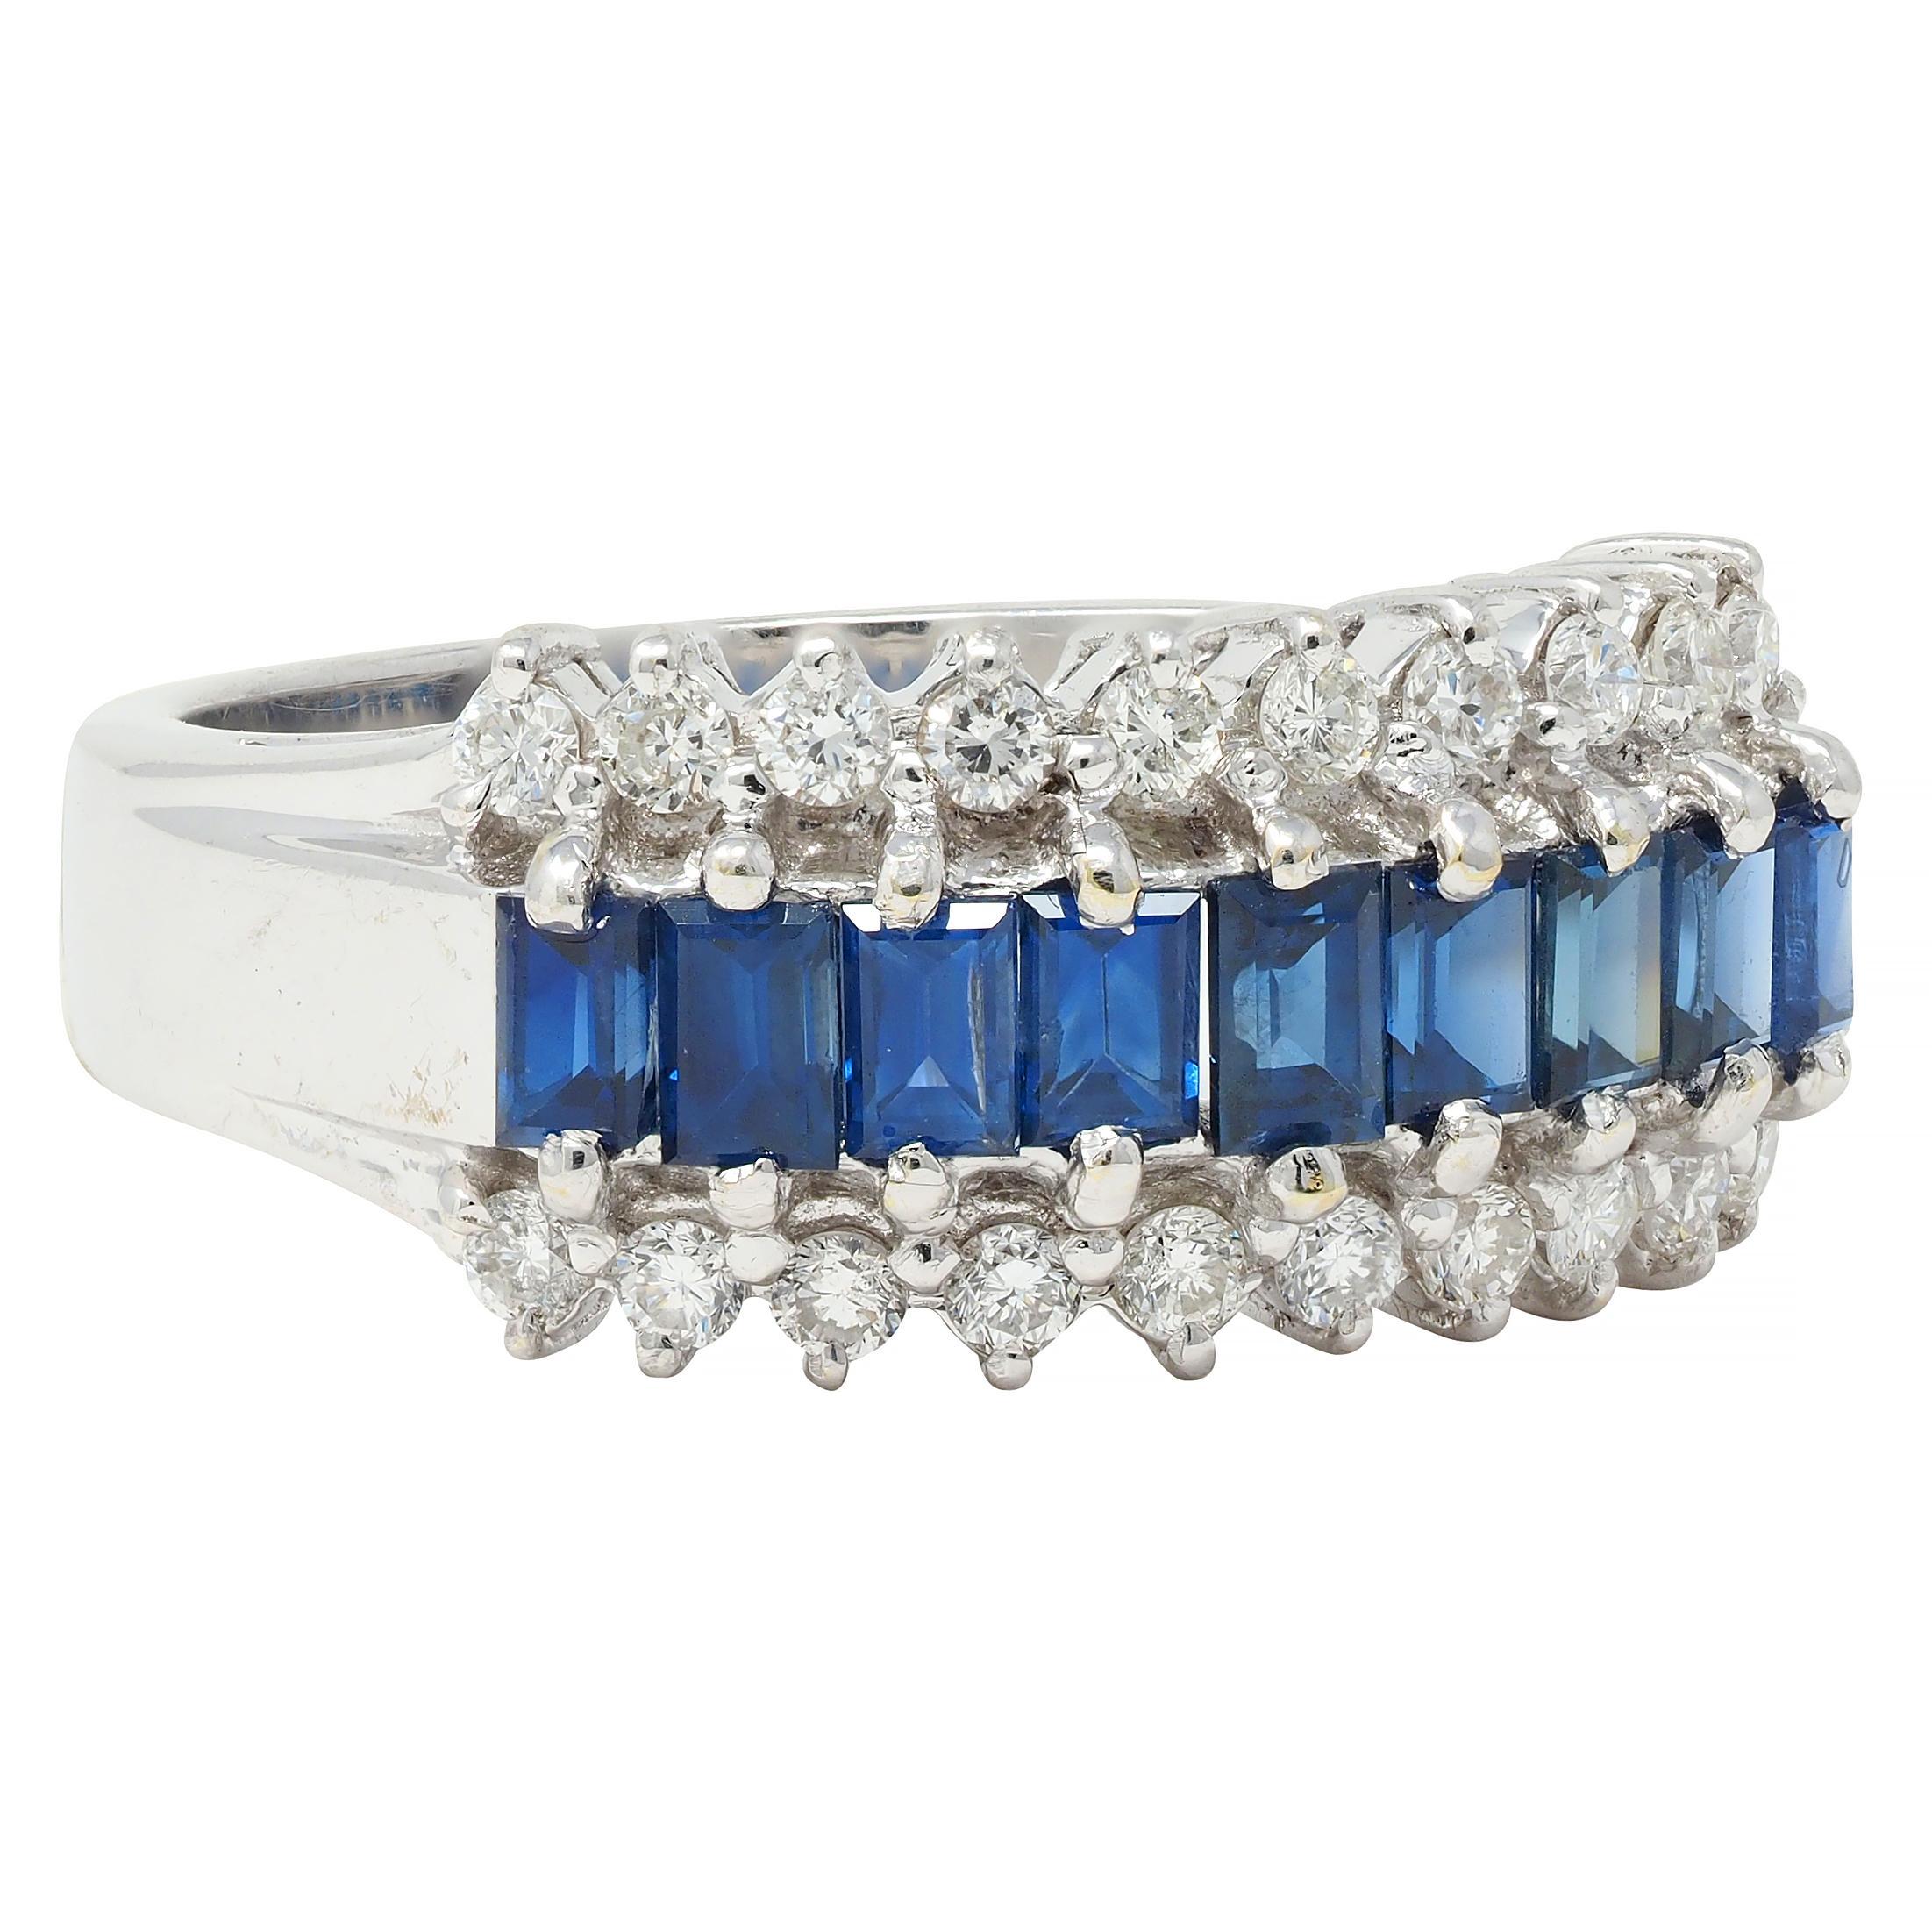 Featuring a row of baguette cut sapphires weighing approximately 0.99 carat total 
Transparent medium blue and prong set east to west 
Flanked by rows of round brilliant cut diamonds
Weighing approximately 0.60 carat total 
G/H color with VS2